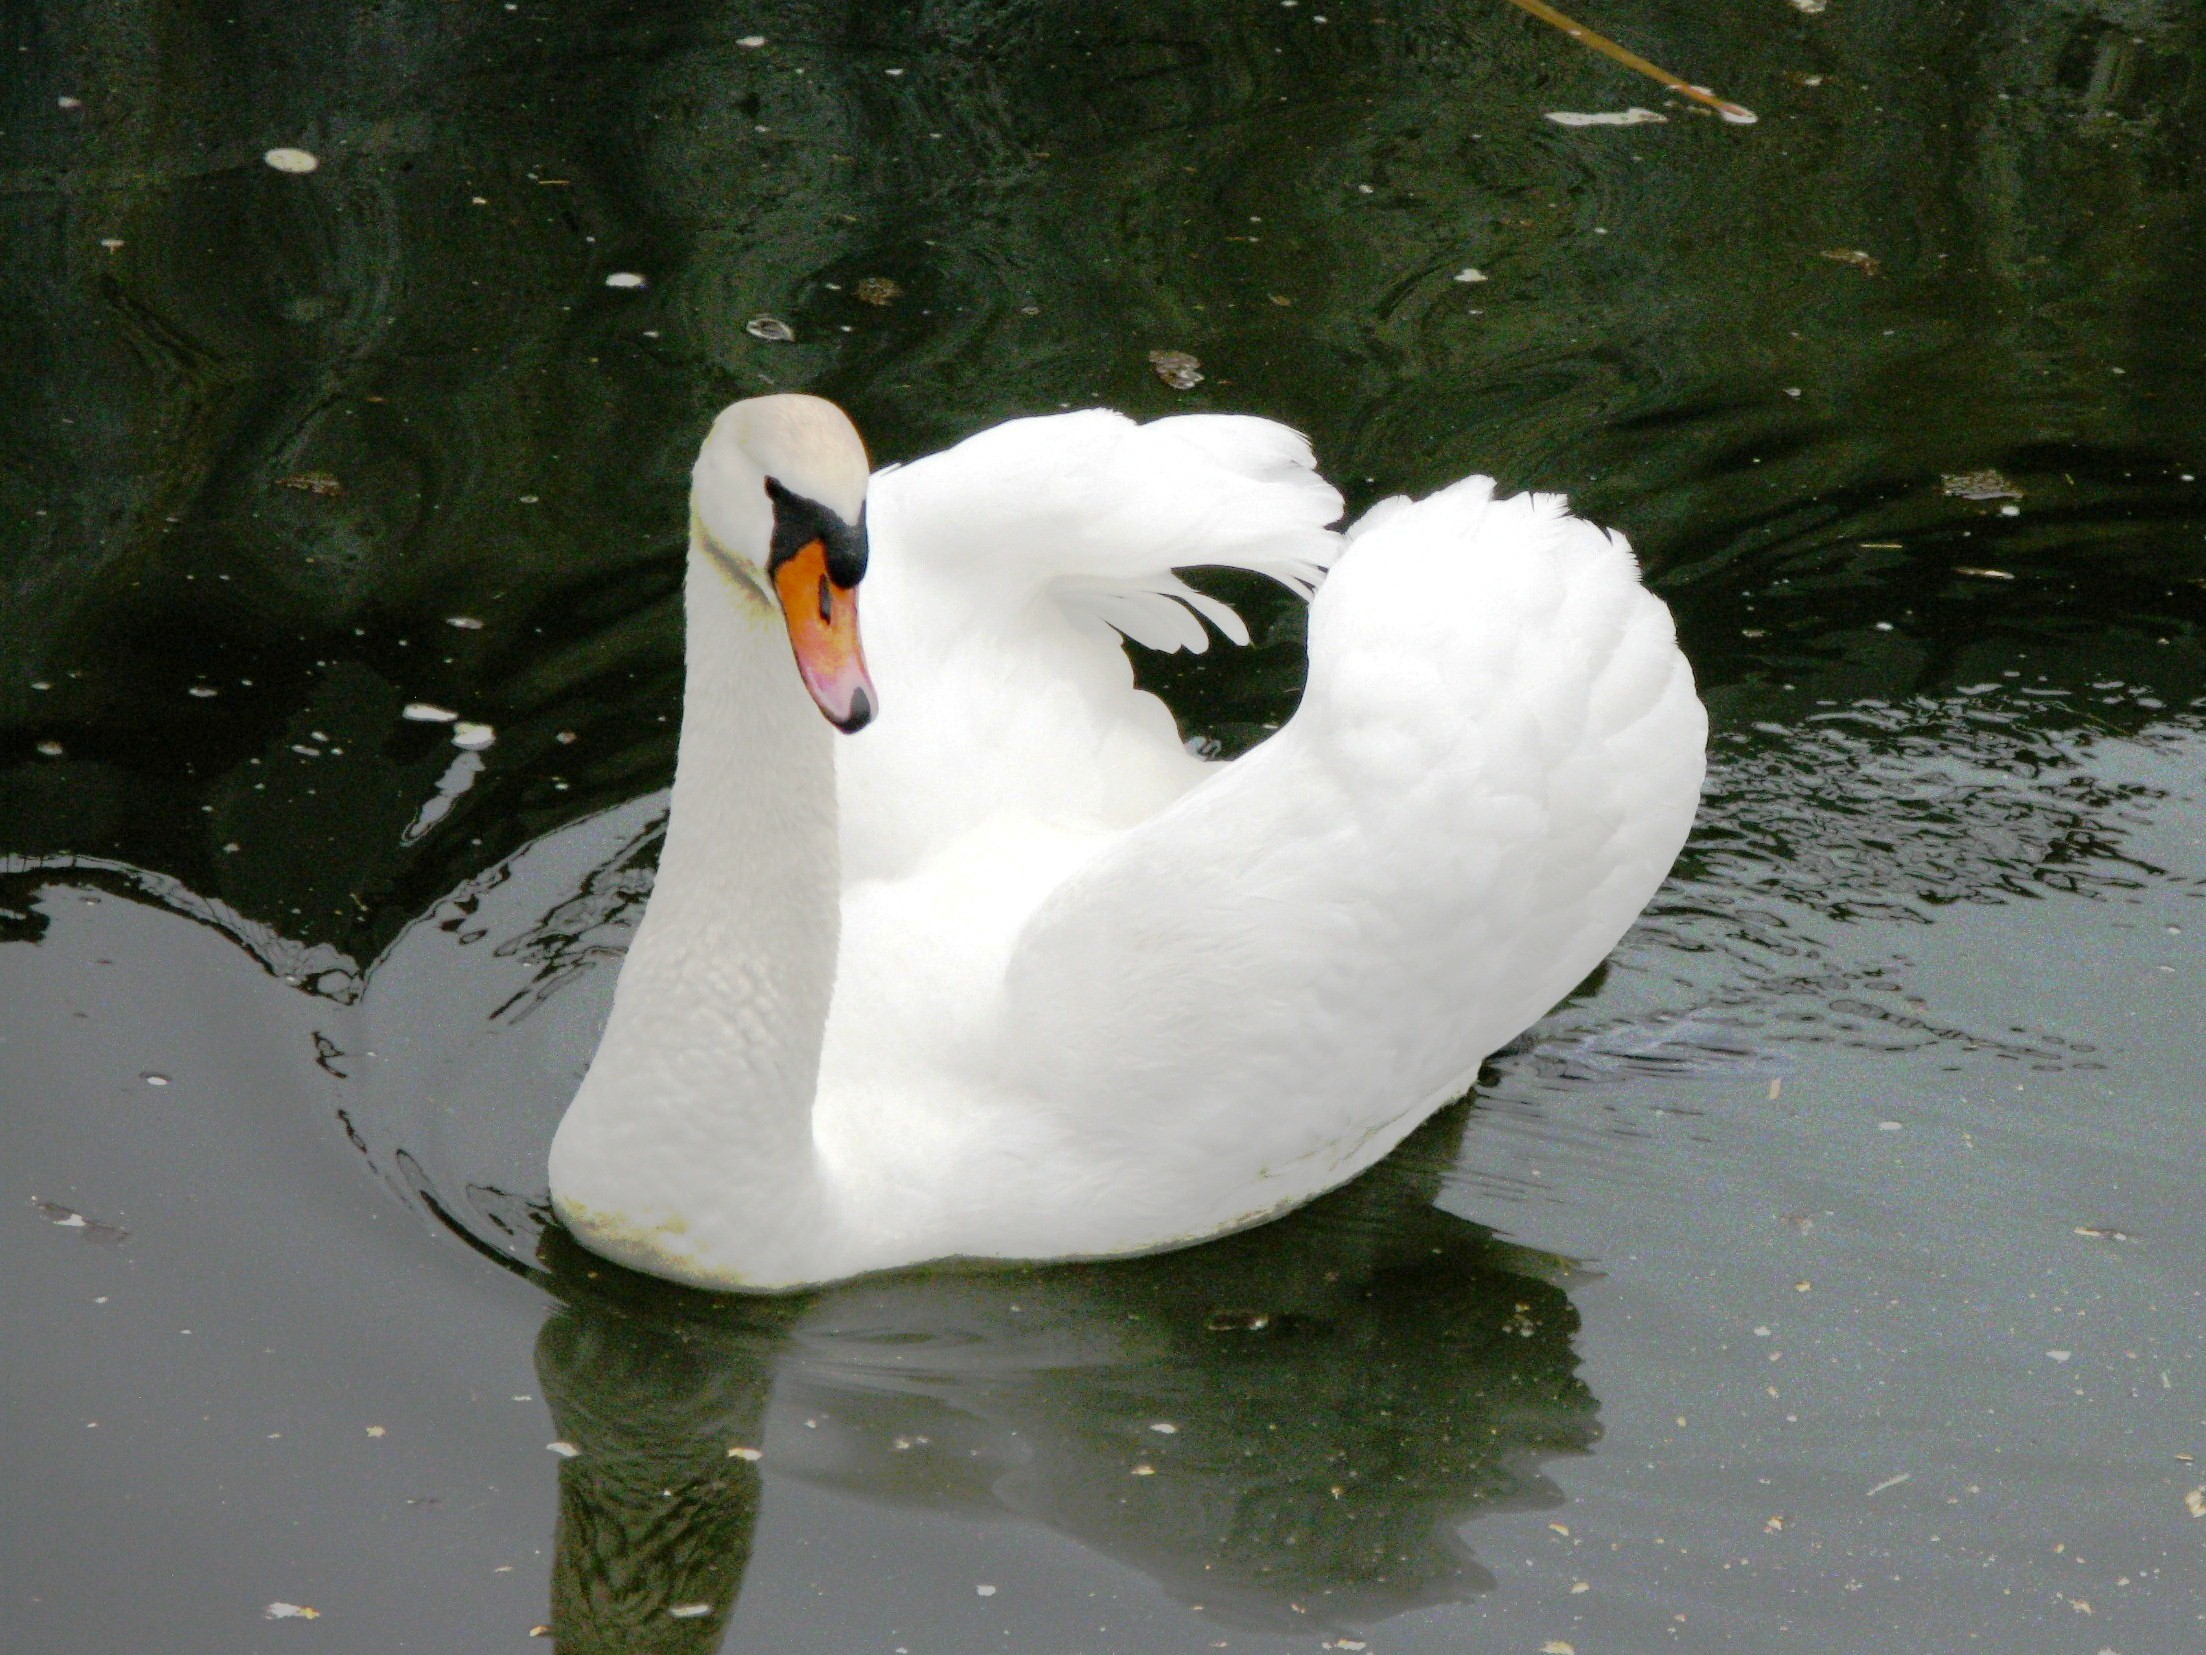 The nature of the distribution of geese and swans in various habitats